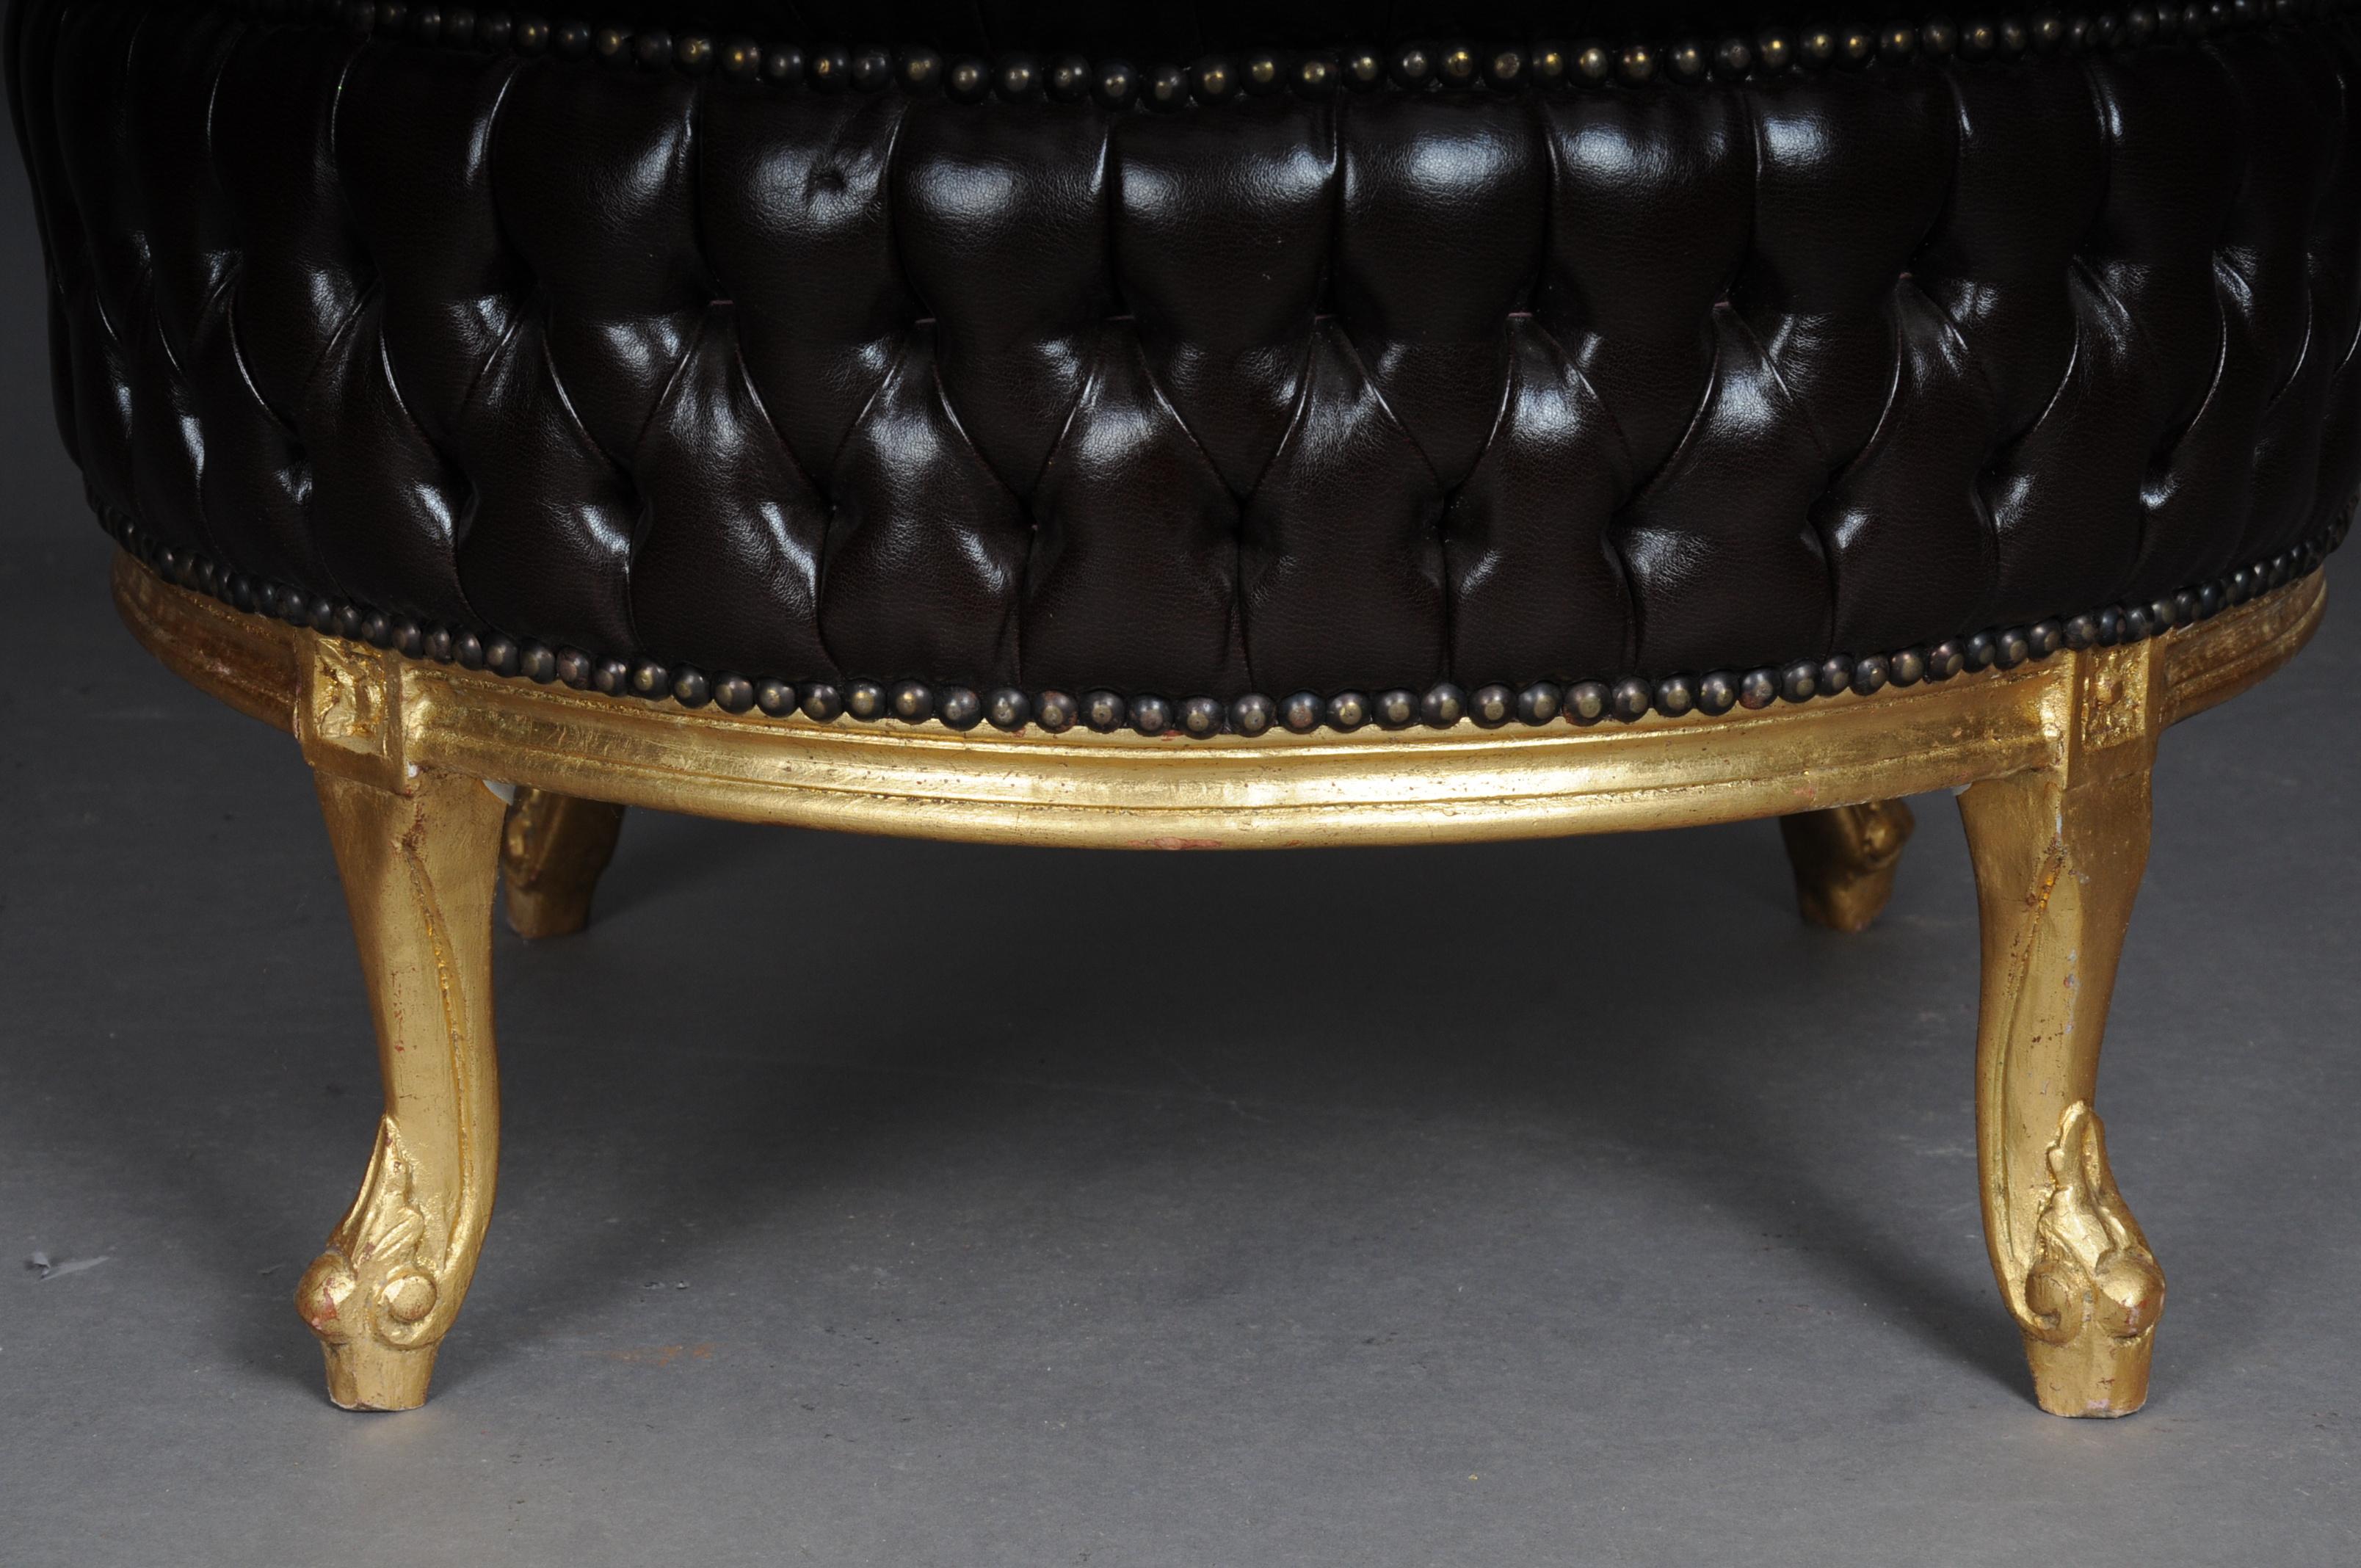 20th century large stool/bench, Chesterfield look

Unusual stool in the Classic English Chesterfield look. Seat cover made of brown sky leather.
Solid wood frame, gilded. 
France Louis XV style

(B-Mu-2).